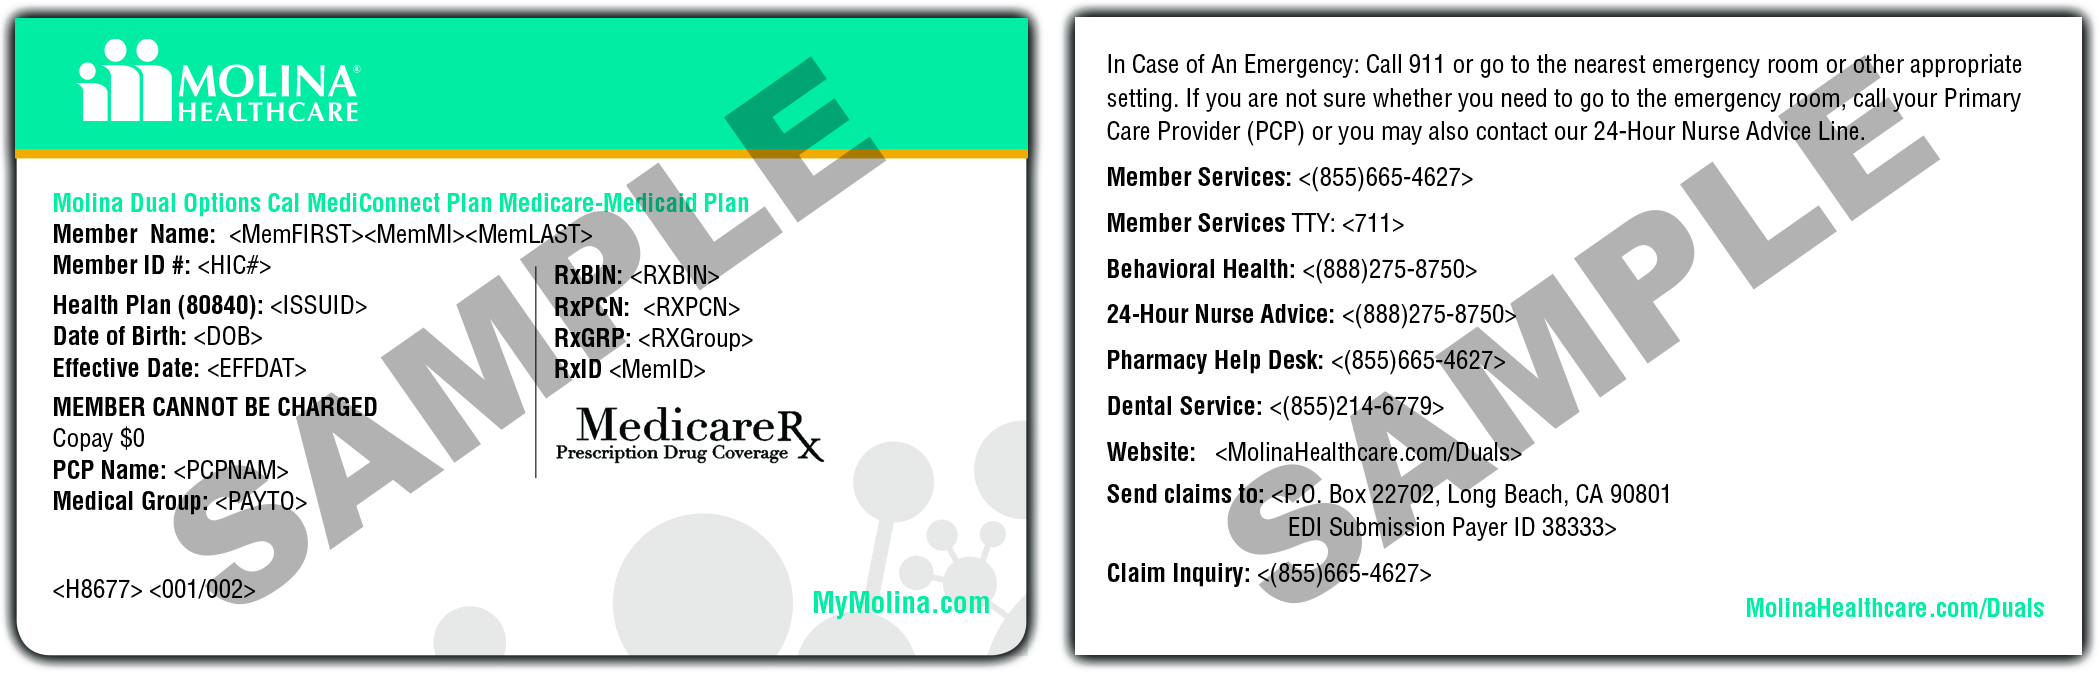 Insurance Policy Group Number Molina